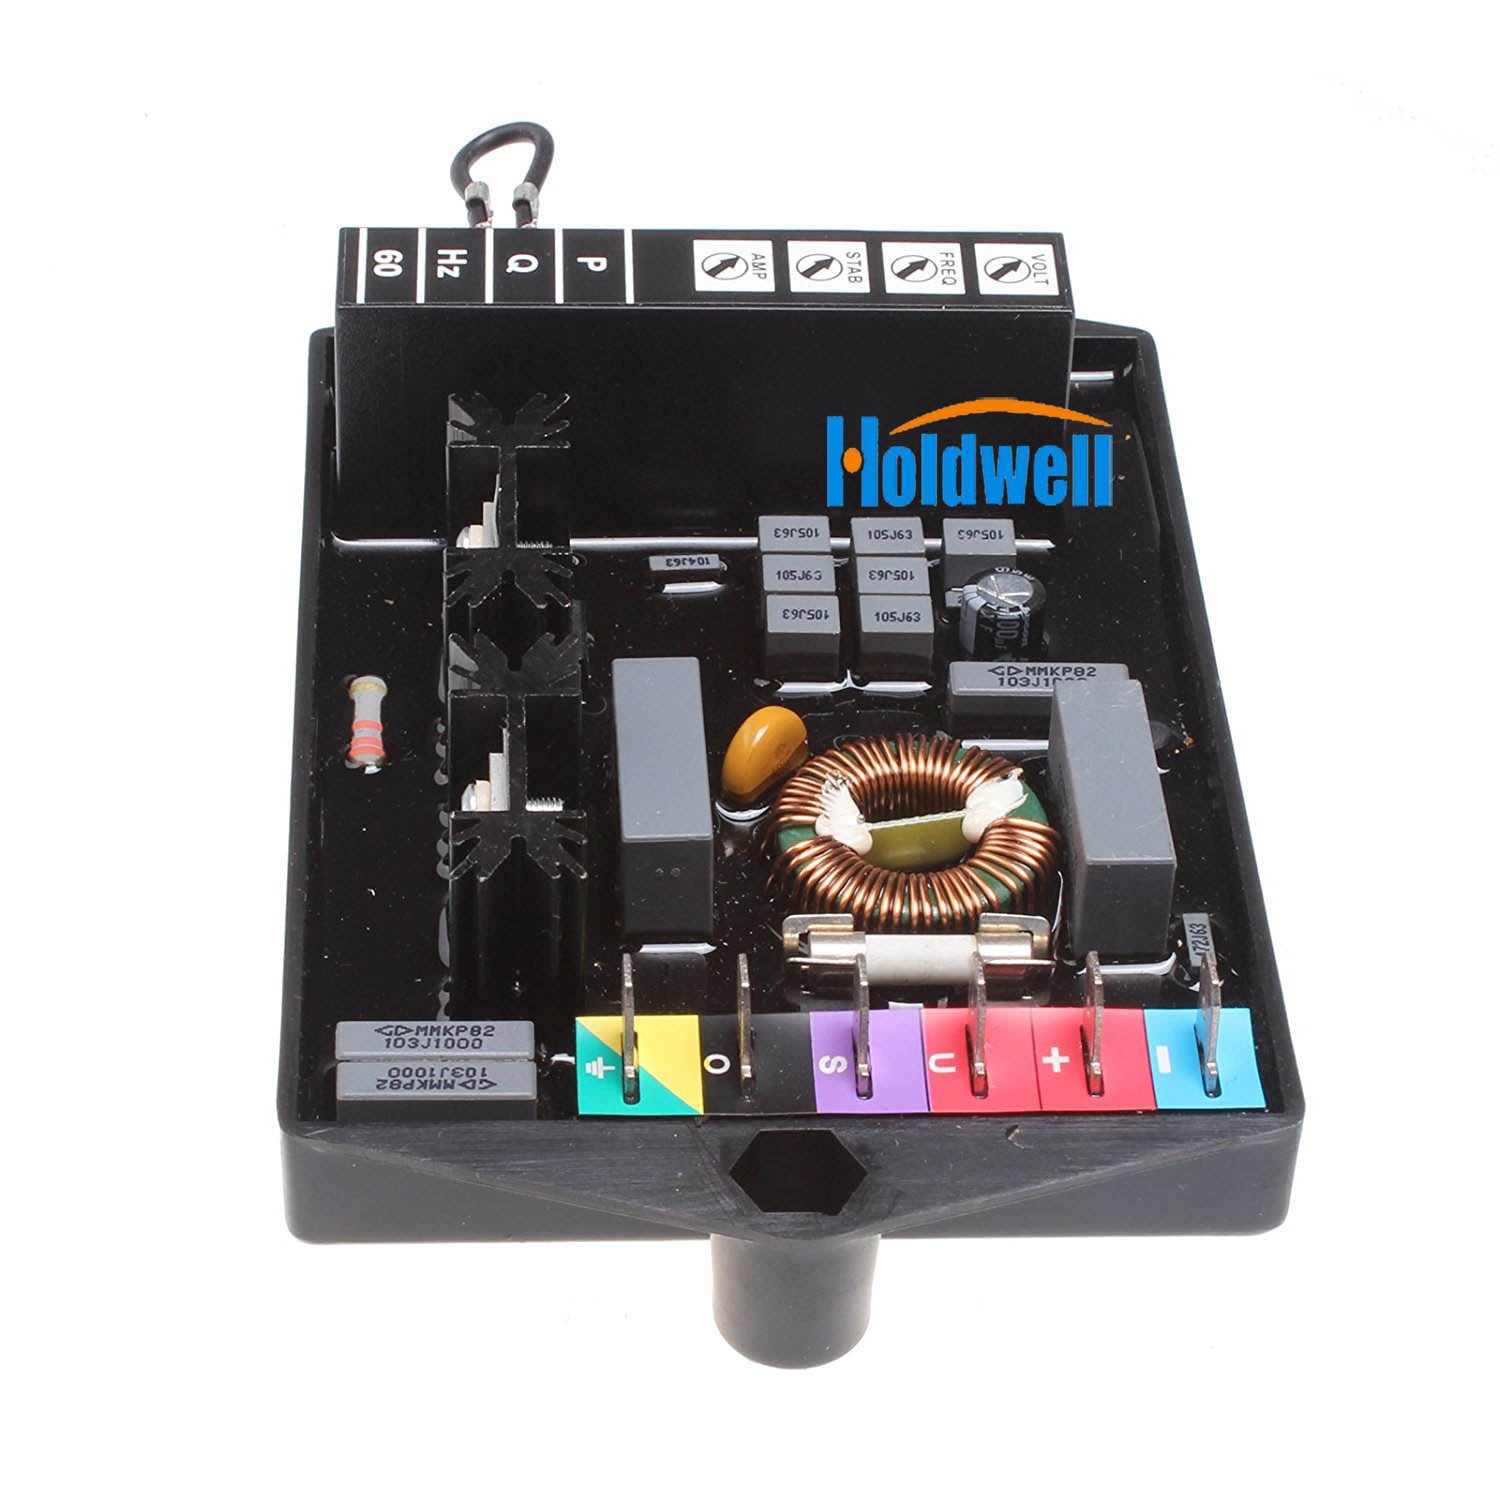 Holdwell AVR M16FA655A Automatic Voltage Regulator Gensets Parts - WoodPoly.com